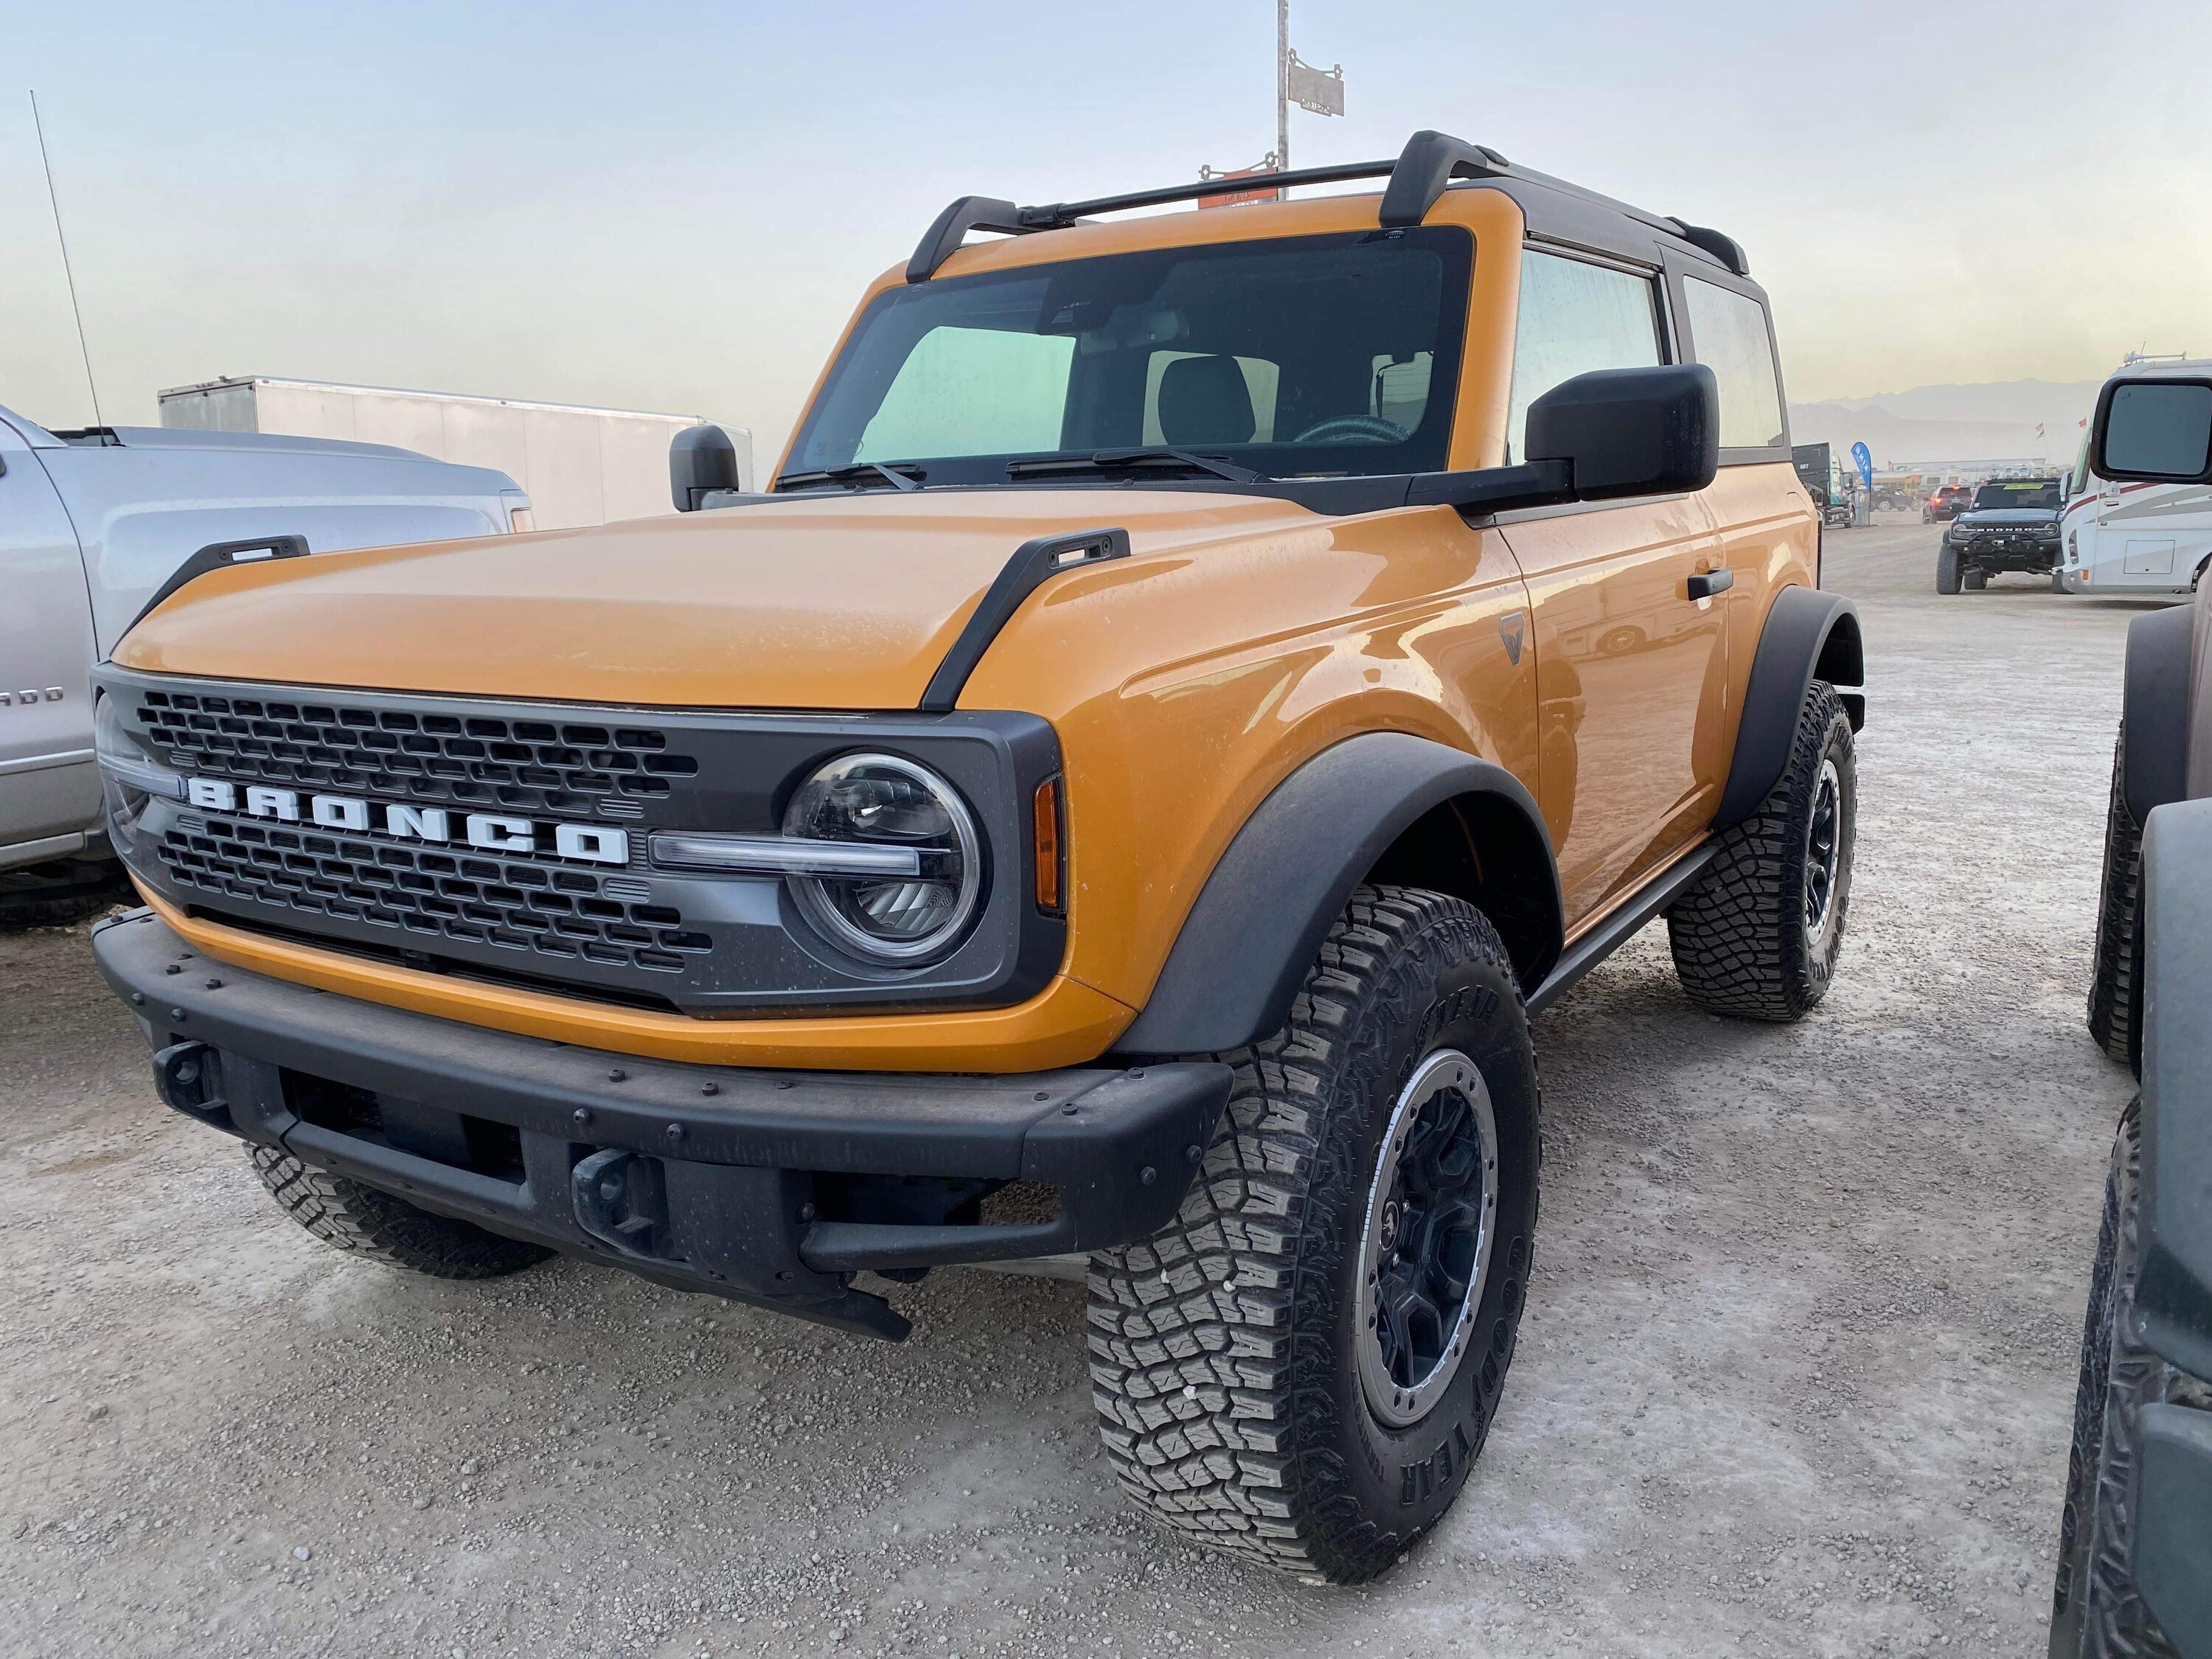 Ford Bronco More 2021 Bronco Suspension Info & Part Numbers: Standard, Special and High Ride C29ACECA-0E68-4E97-8869-71831592C125